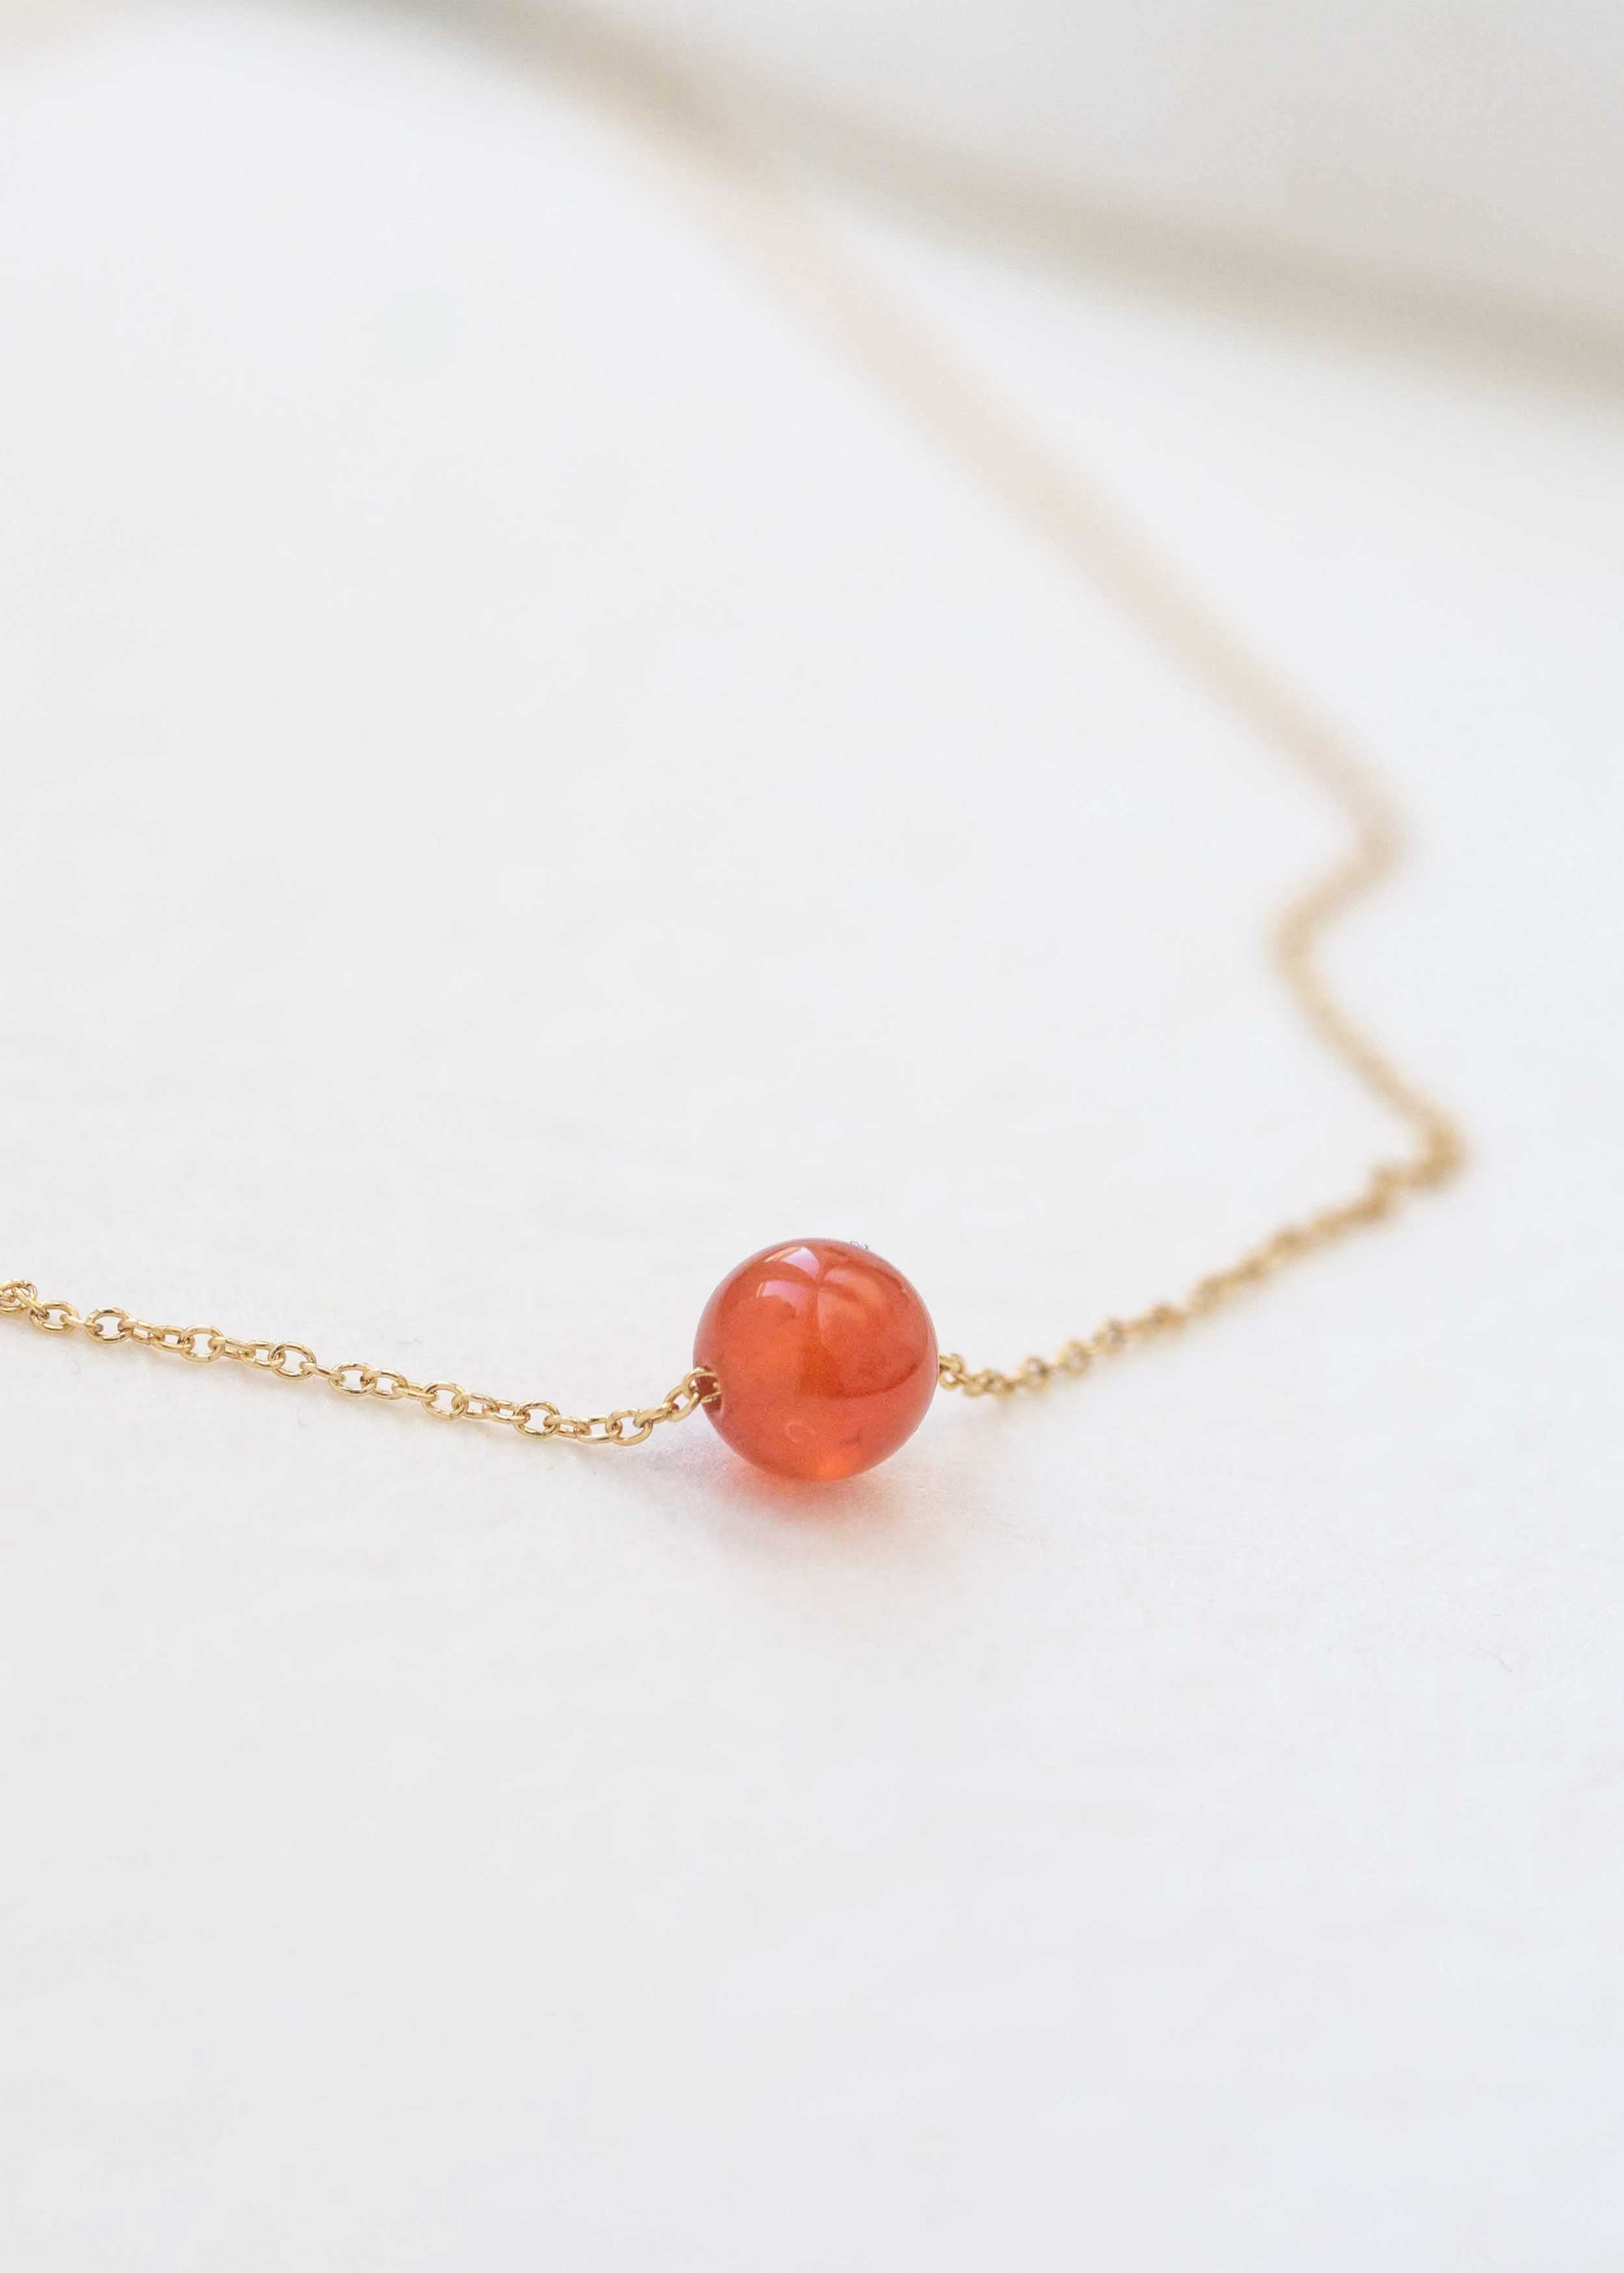 Delicate Genuine Real Carnelian Stone Necklace in Gold Filled Chain